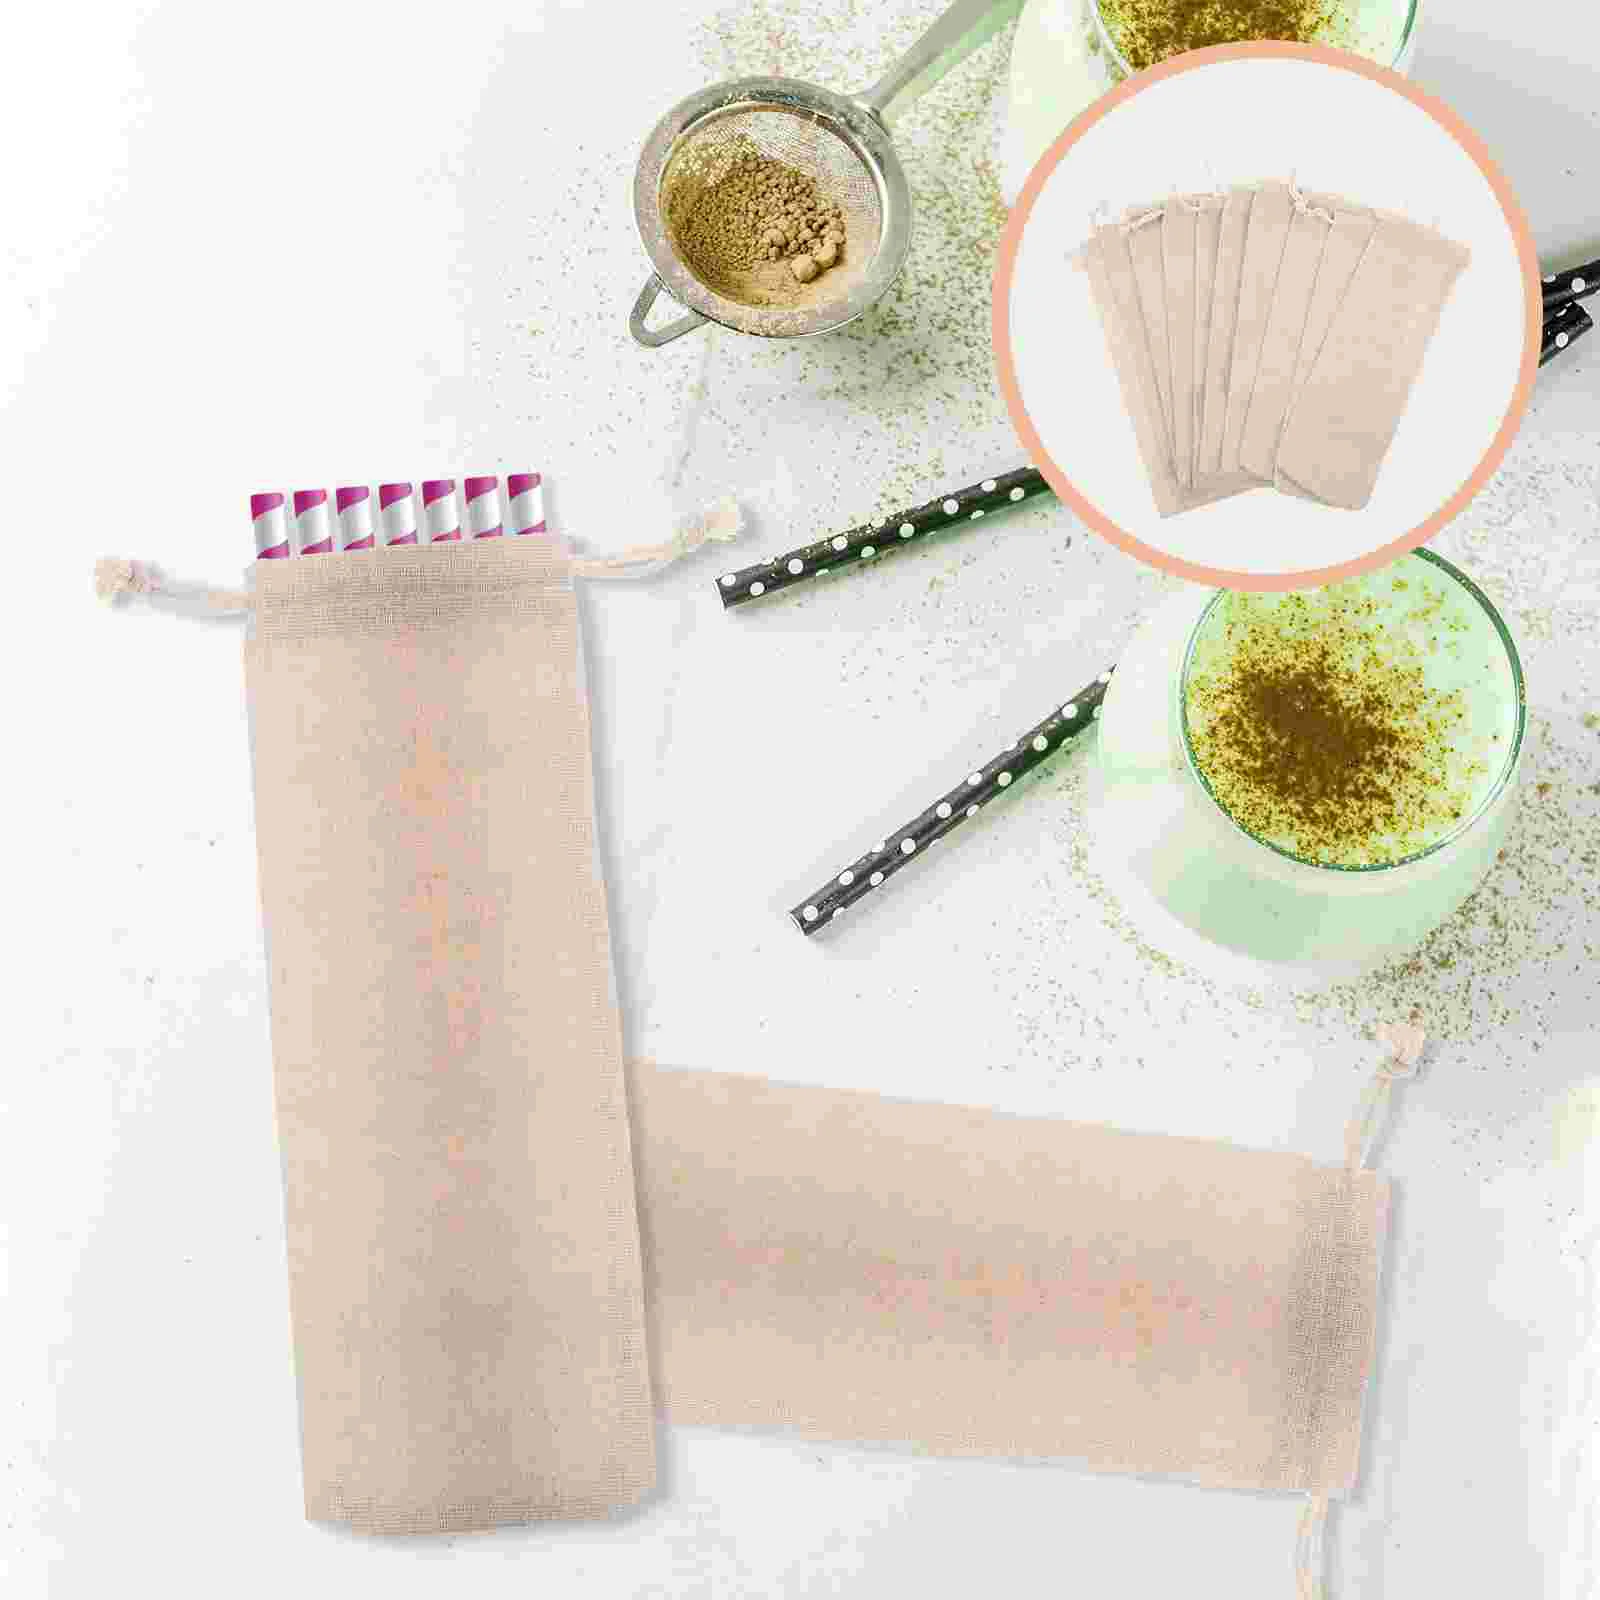 

Bag Bags Straws Straw Pouch Reusable Candy Spoon Fork Cutlery Drinking Favor Forks Cotton Burlap Travel Carrying Linen